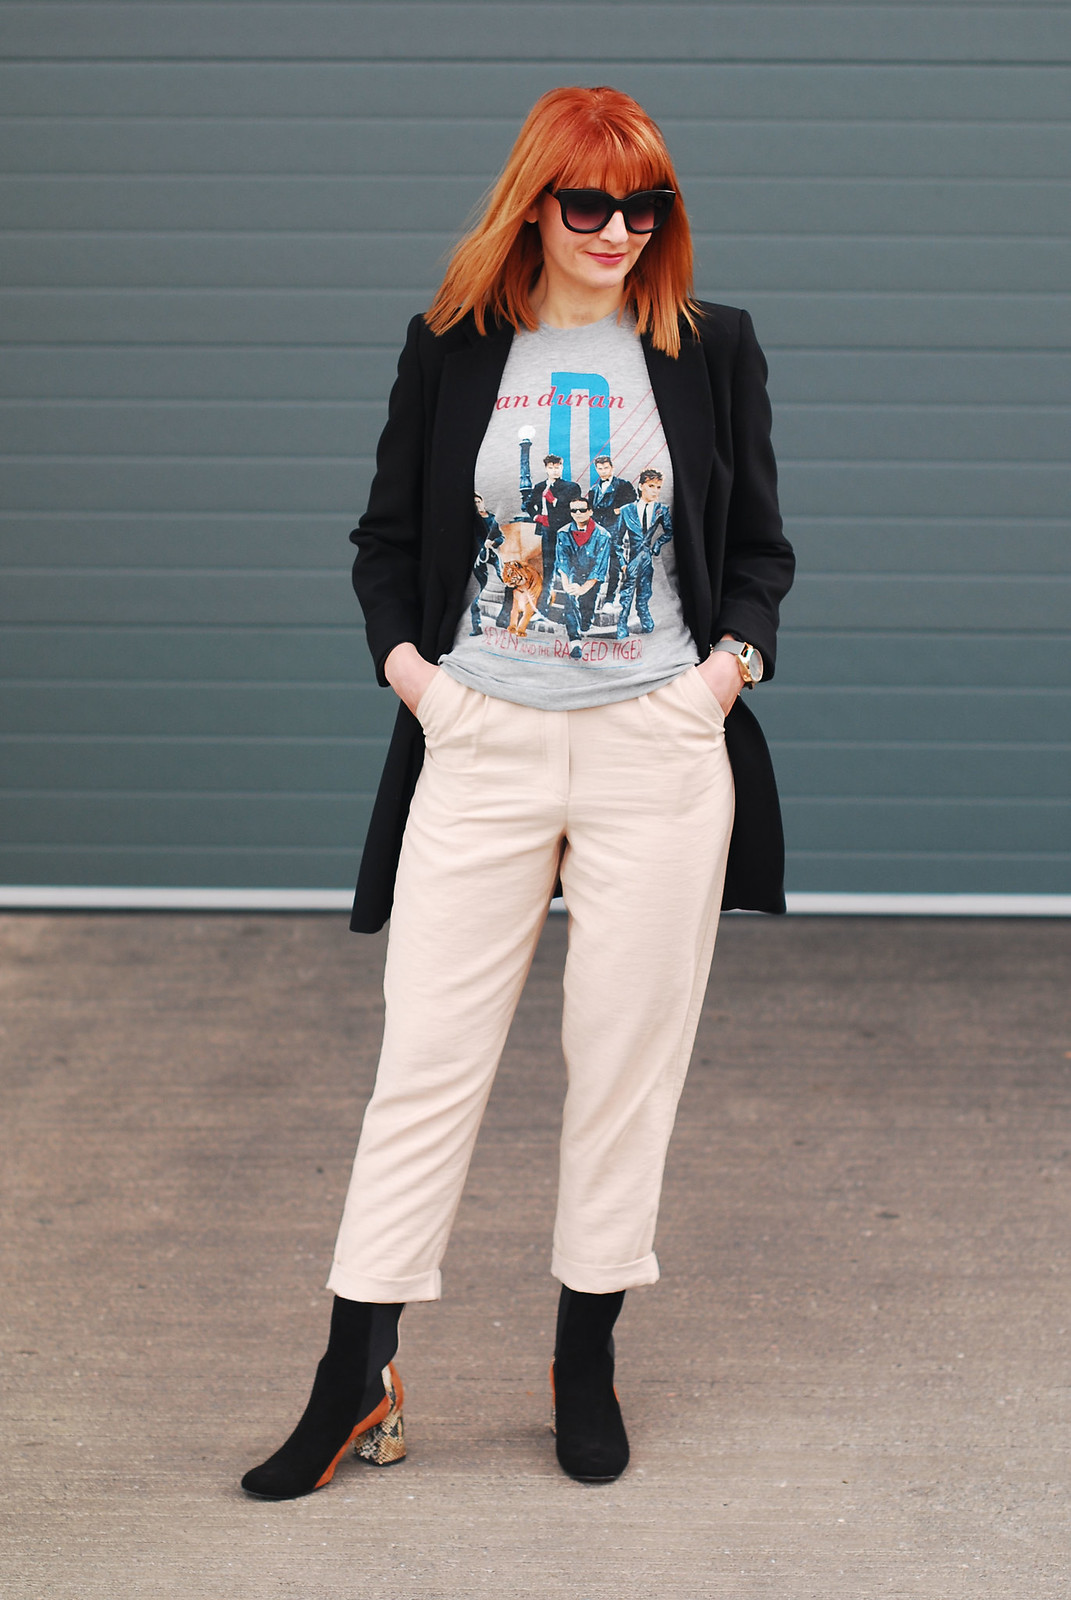 Styling an original band t-shirt: Longline black blazer vintage Duran Duran tour t-shirt taupe peg leg menswear-style trousers snakeskin and panelled suede Finery ankle boots | Not Dressed As Lamb, over 40 style